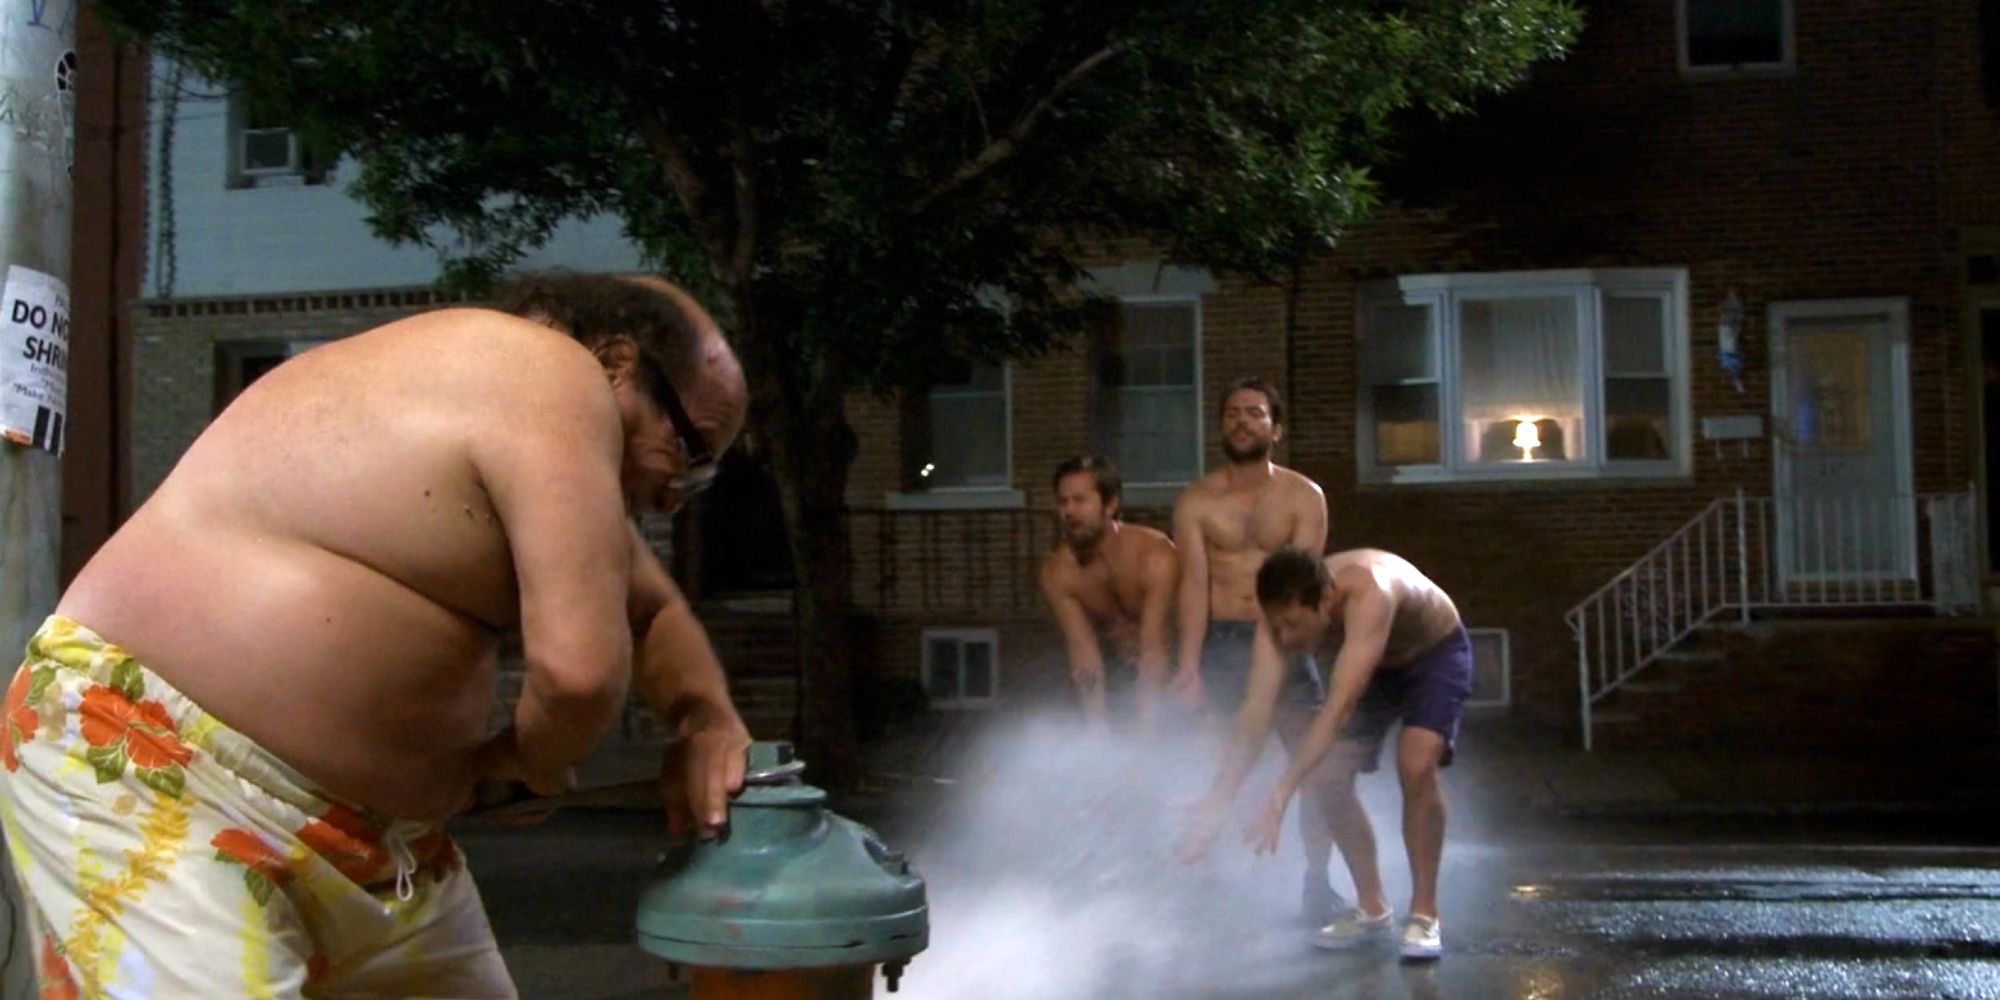 The gang plays in fire hydrant water in It's Always Sunny in Philadelphia.